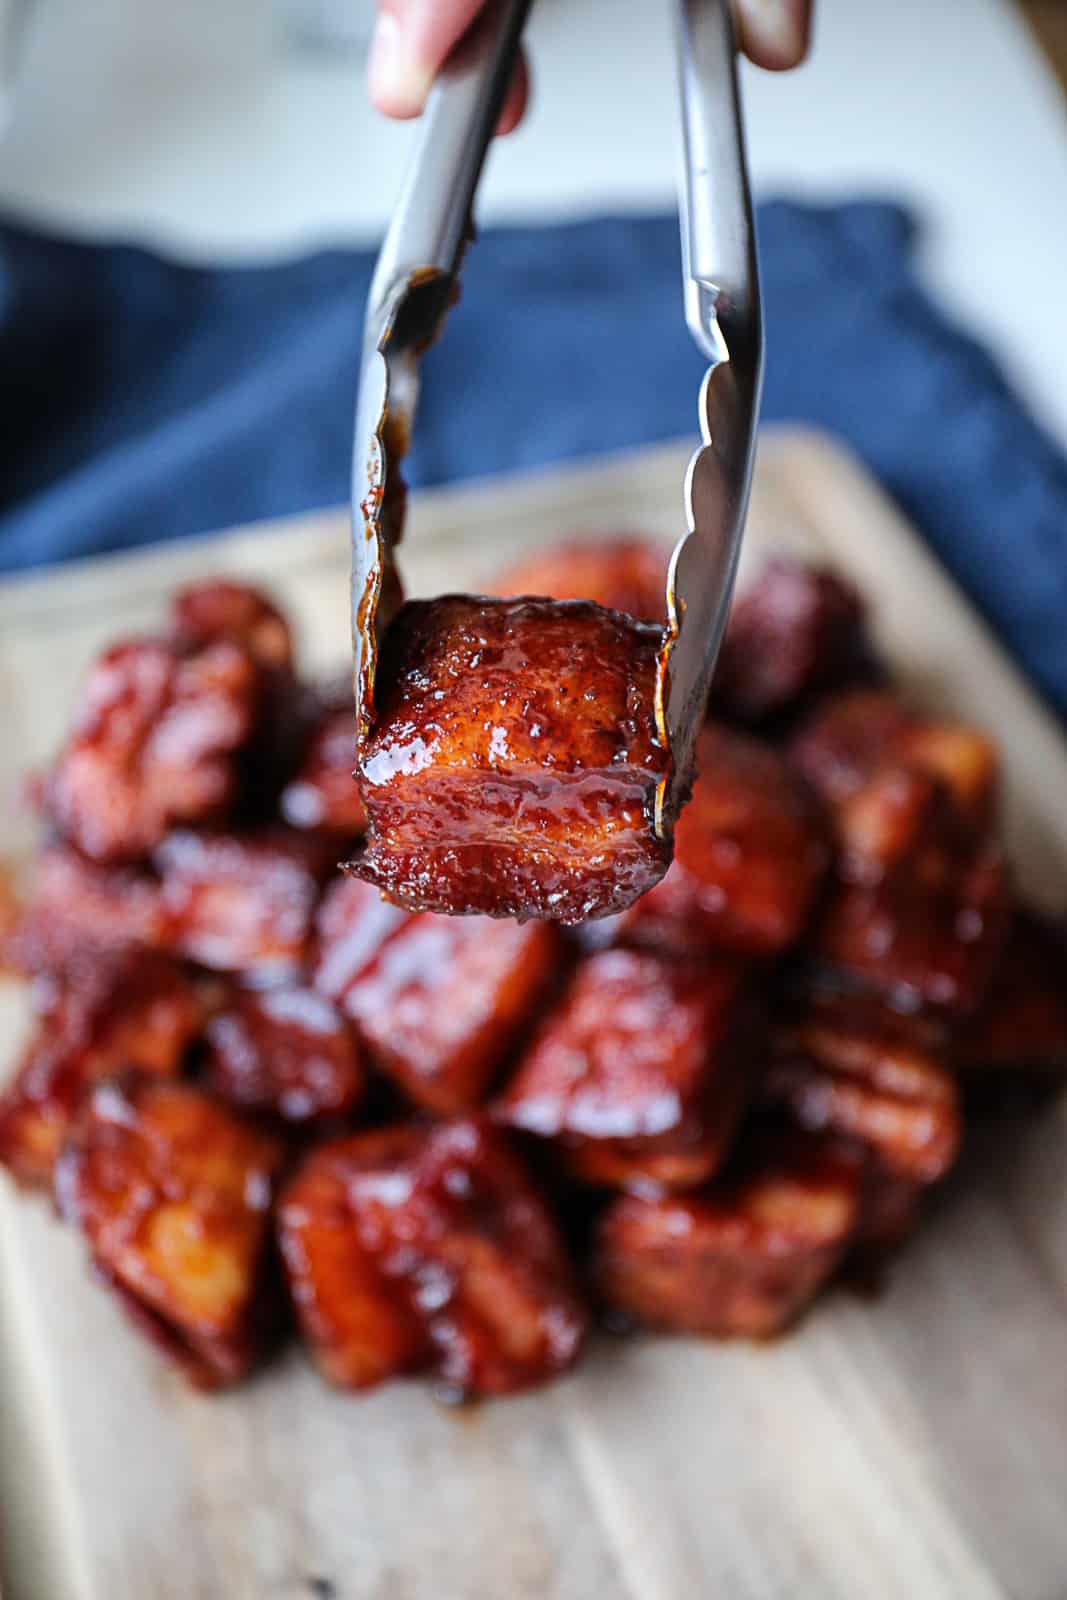 Tongs Holding Smoked Pork Belly Burnt Ends